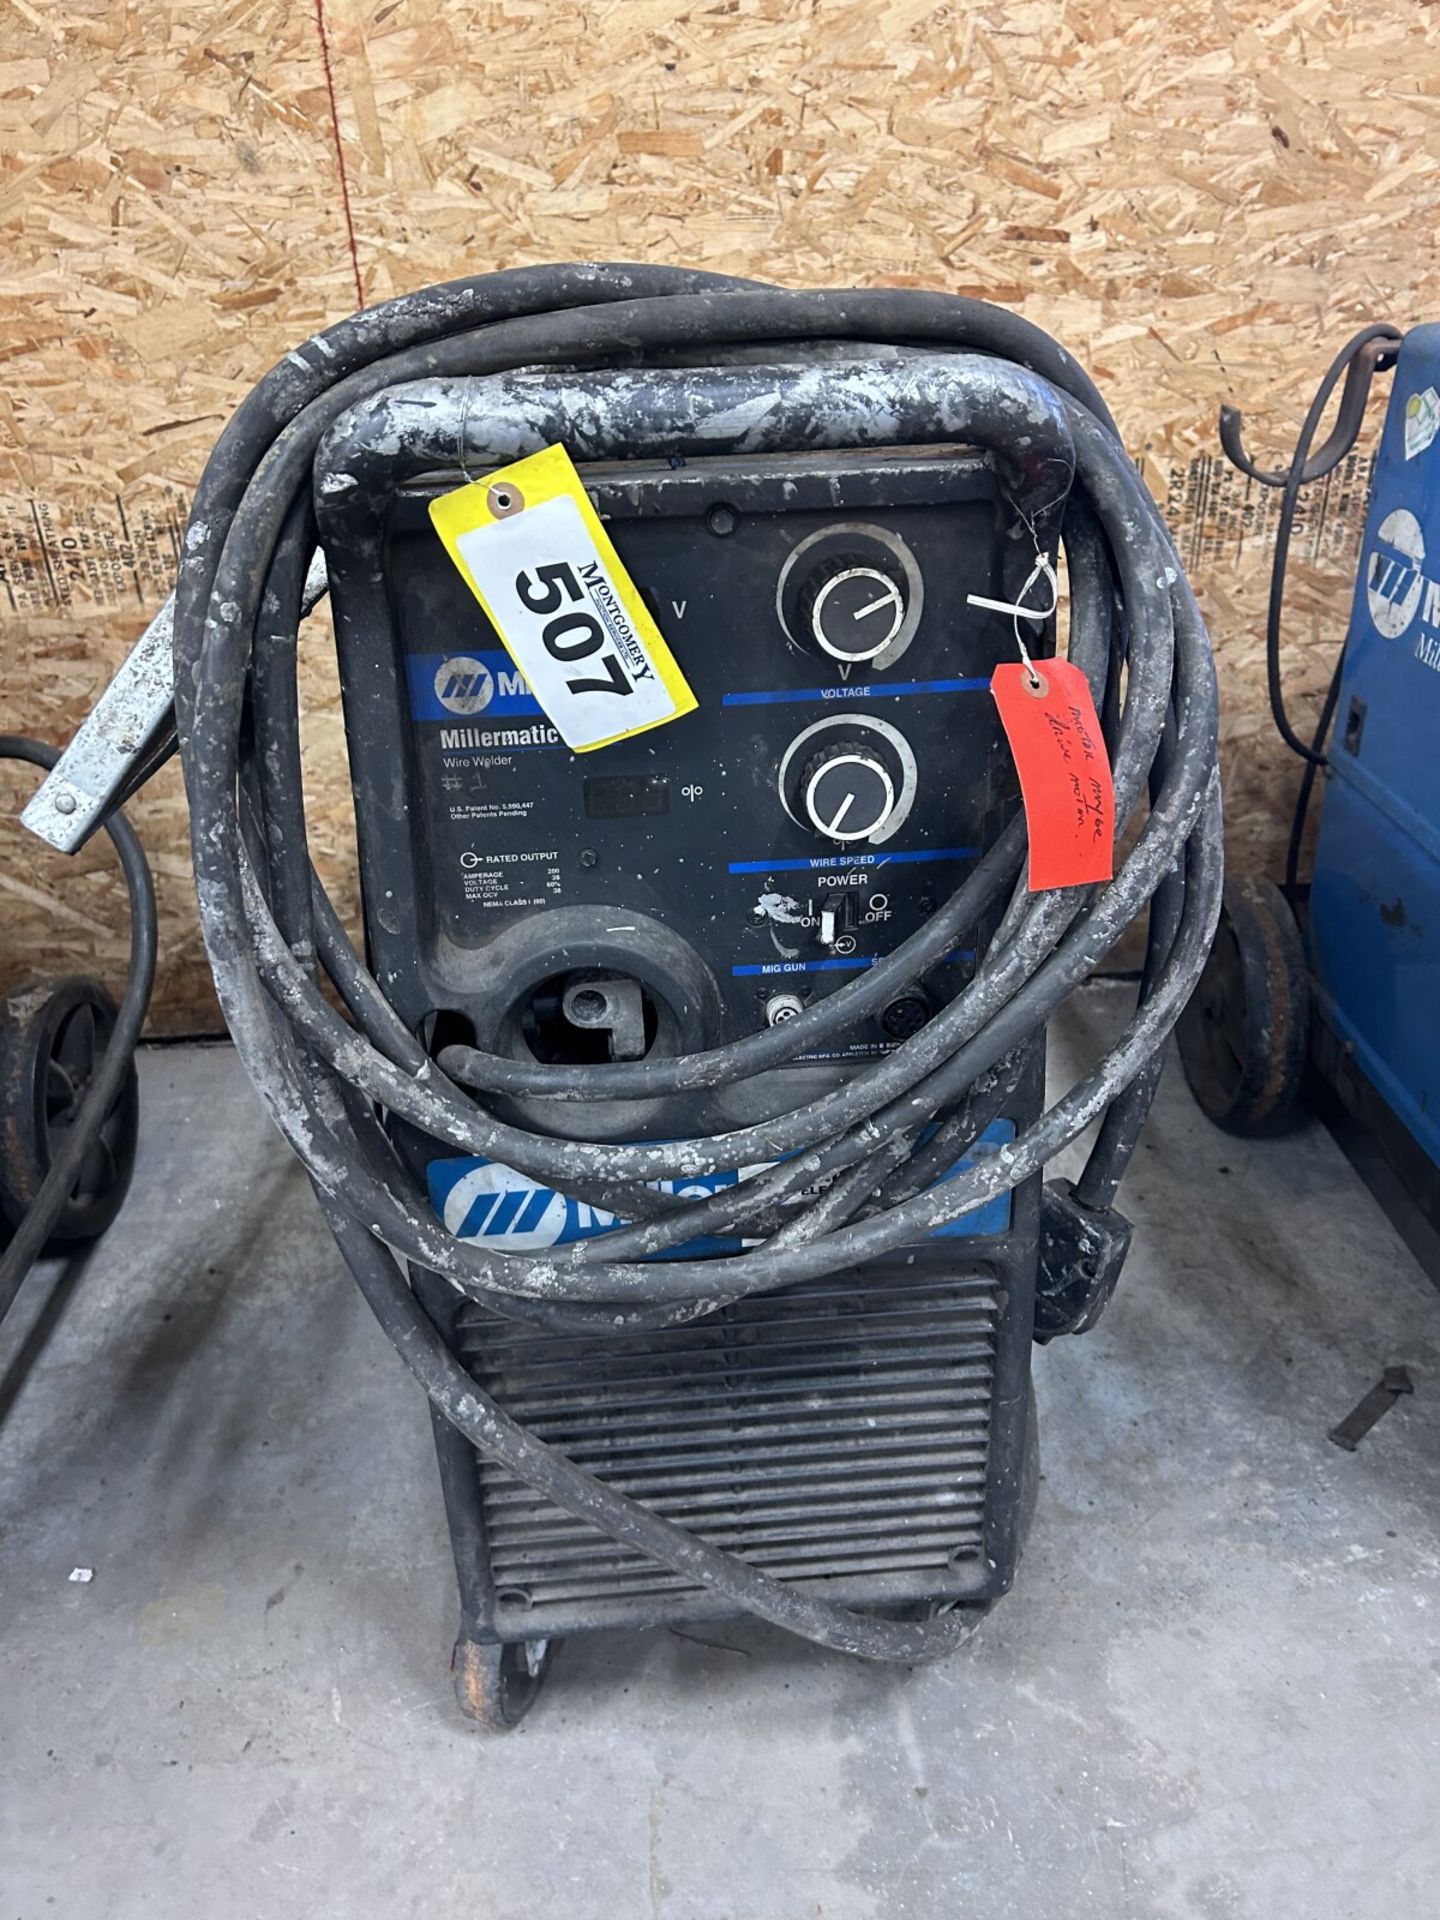 MILLERMATIC 251 MIG WELDER, S/N: LC242724, 220V, 1PH (UNTESTED) - Image 2 of 6